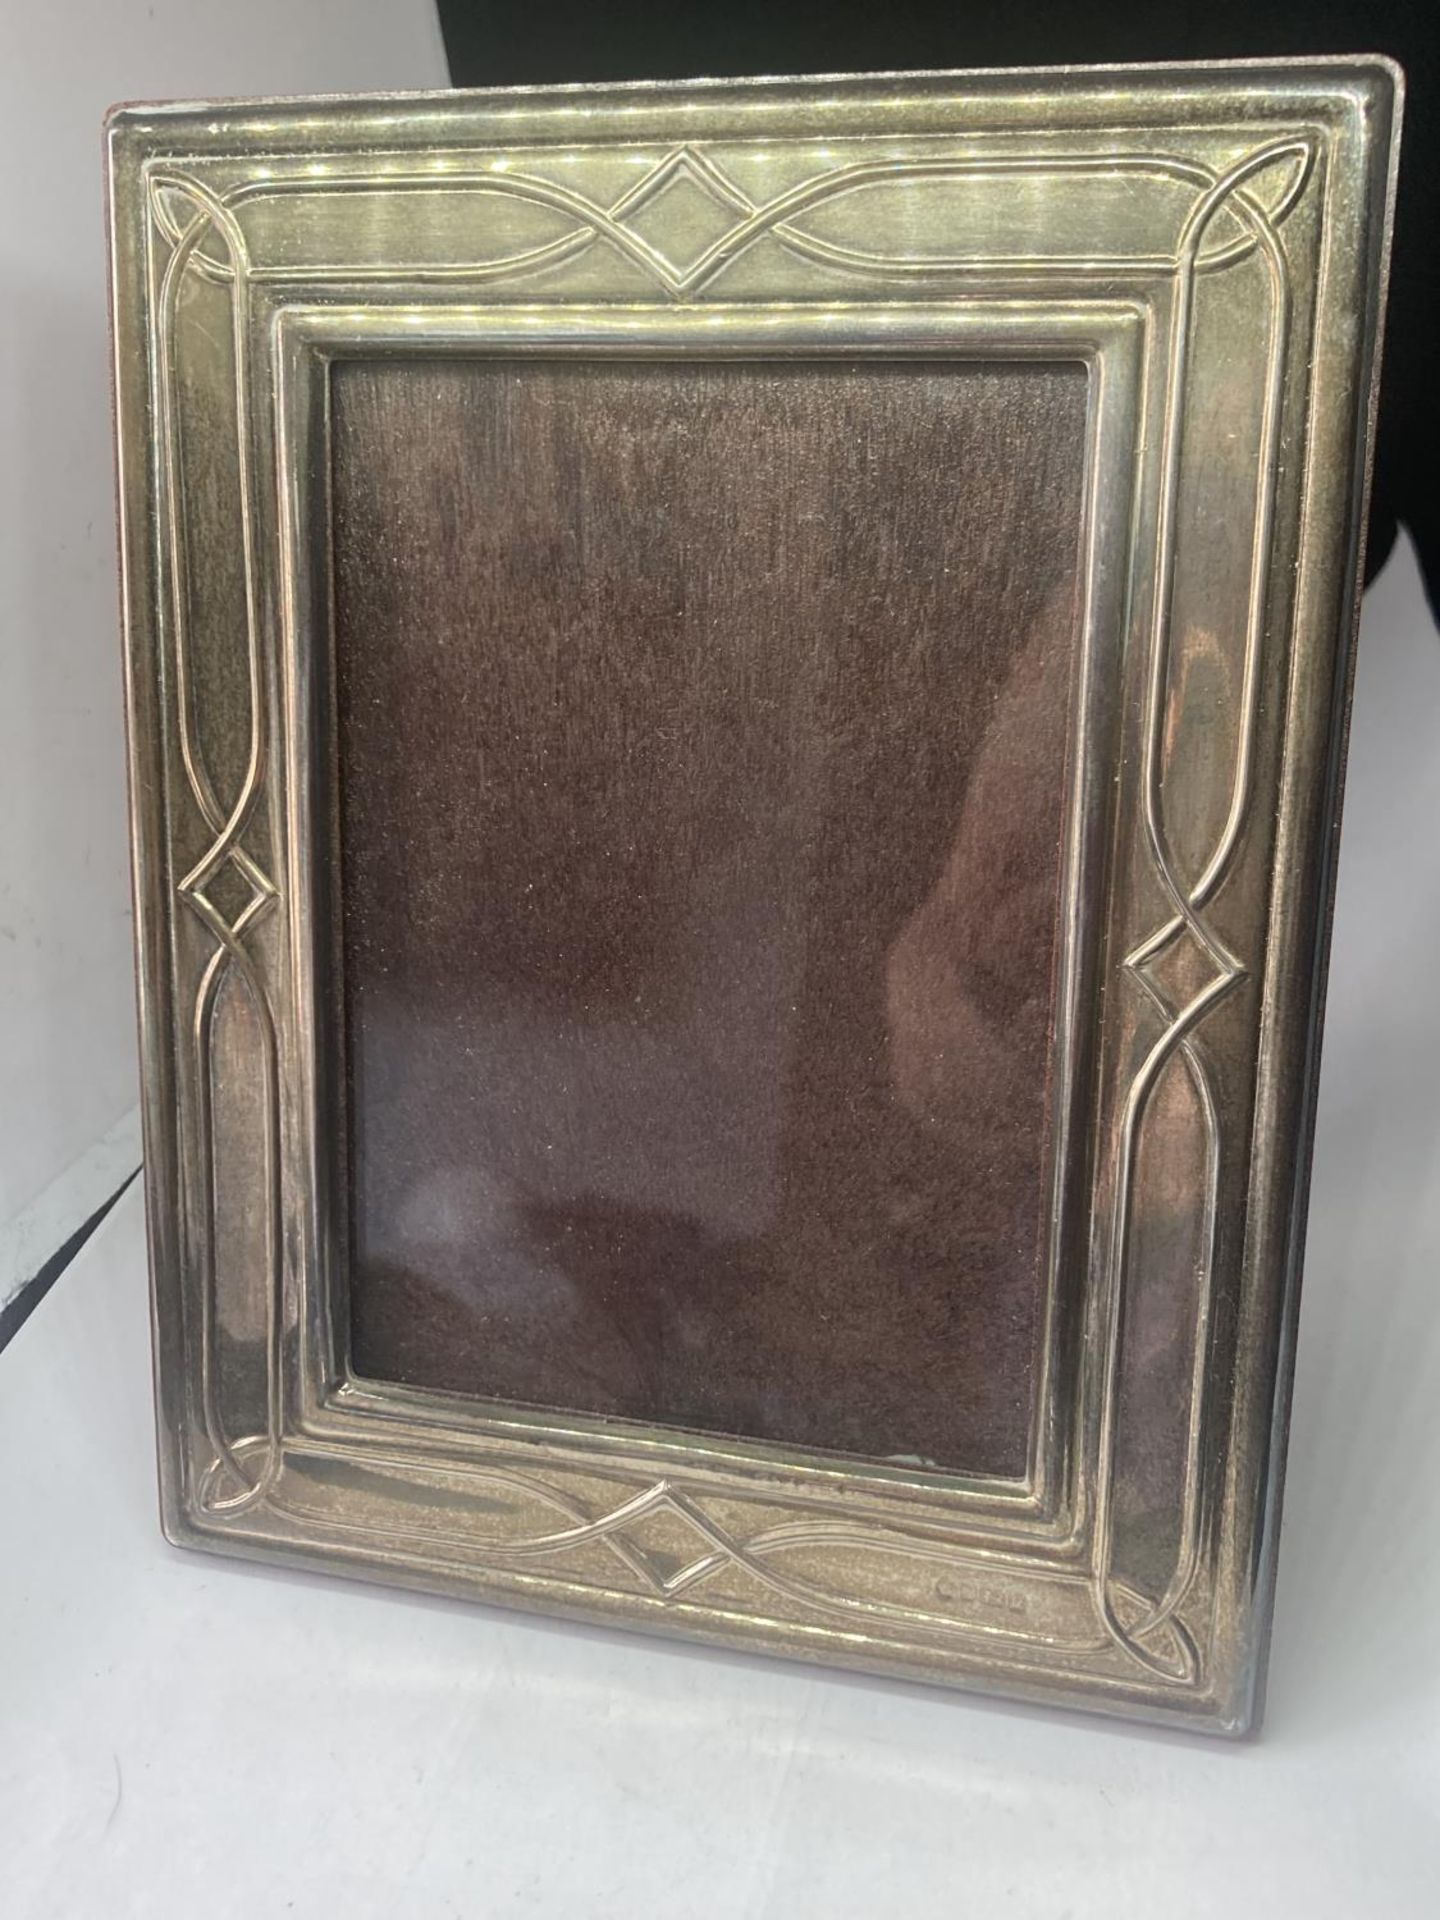 A HALLMARKED SHEFFIELD SILVER PHOTOGRAPH FRAME TO HOLD A 3.5" X 5" PICTURE - Image 2 of 8